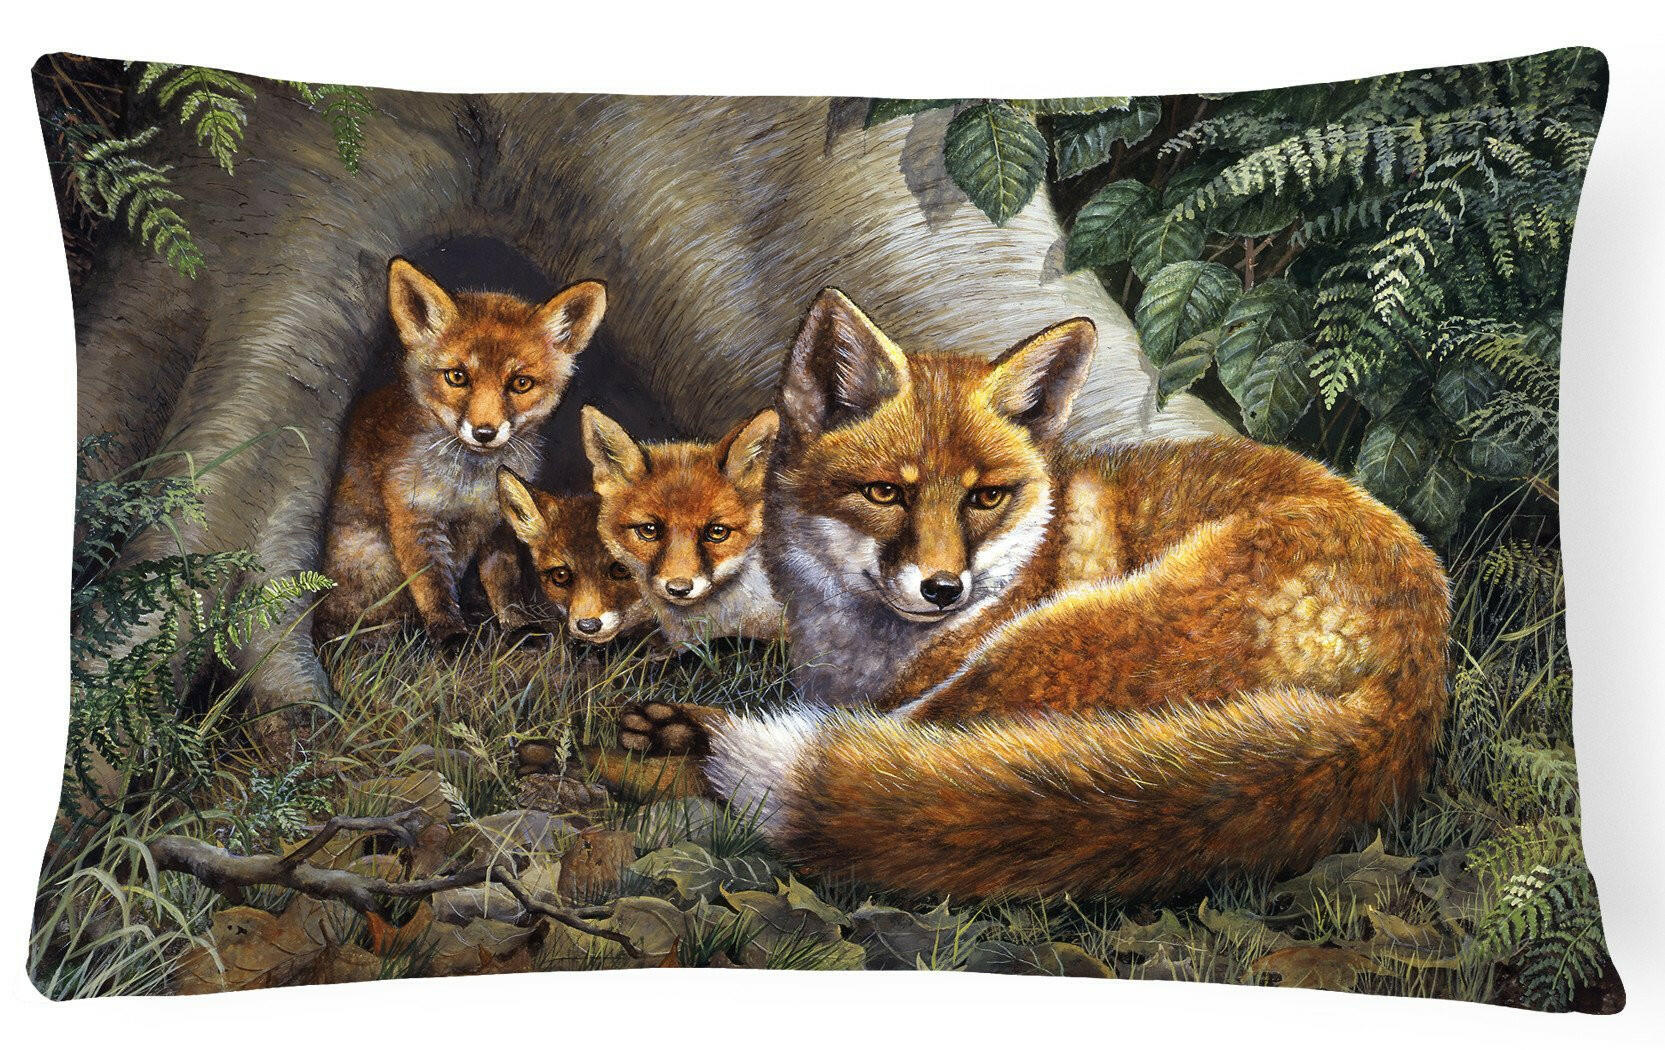 A Family of Foxes at Home Fabric Decorative Pillow BDBA0283PW1216 by Caroline's Treasures